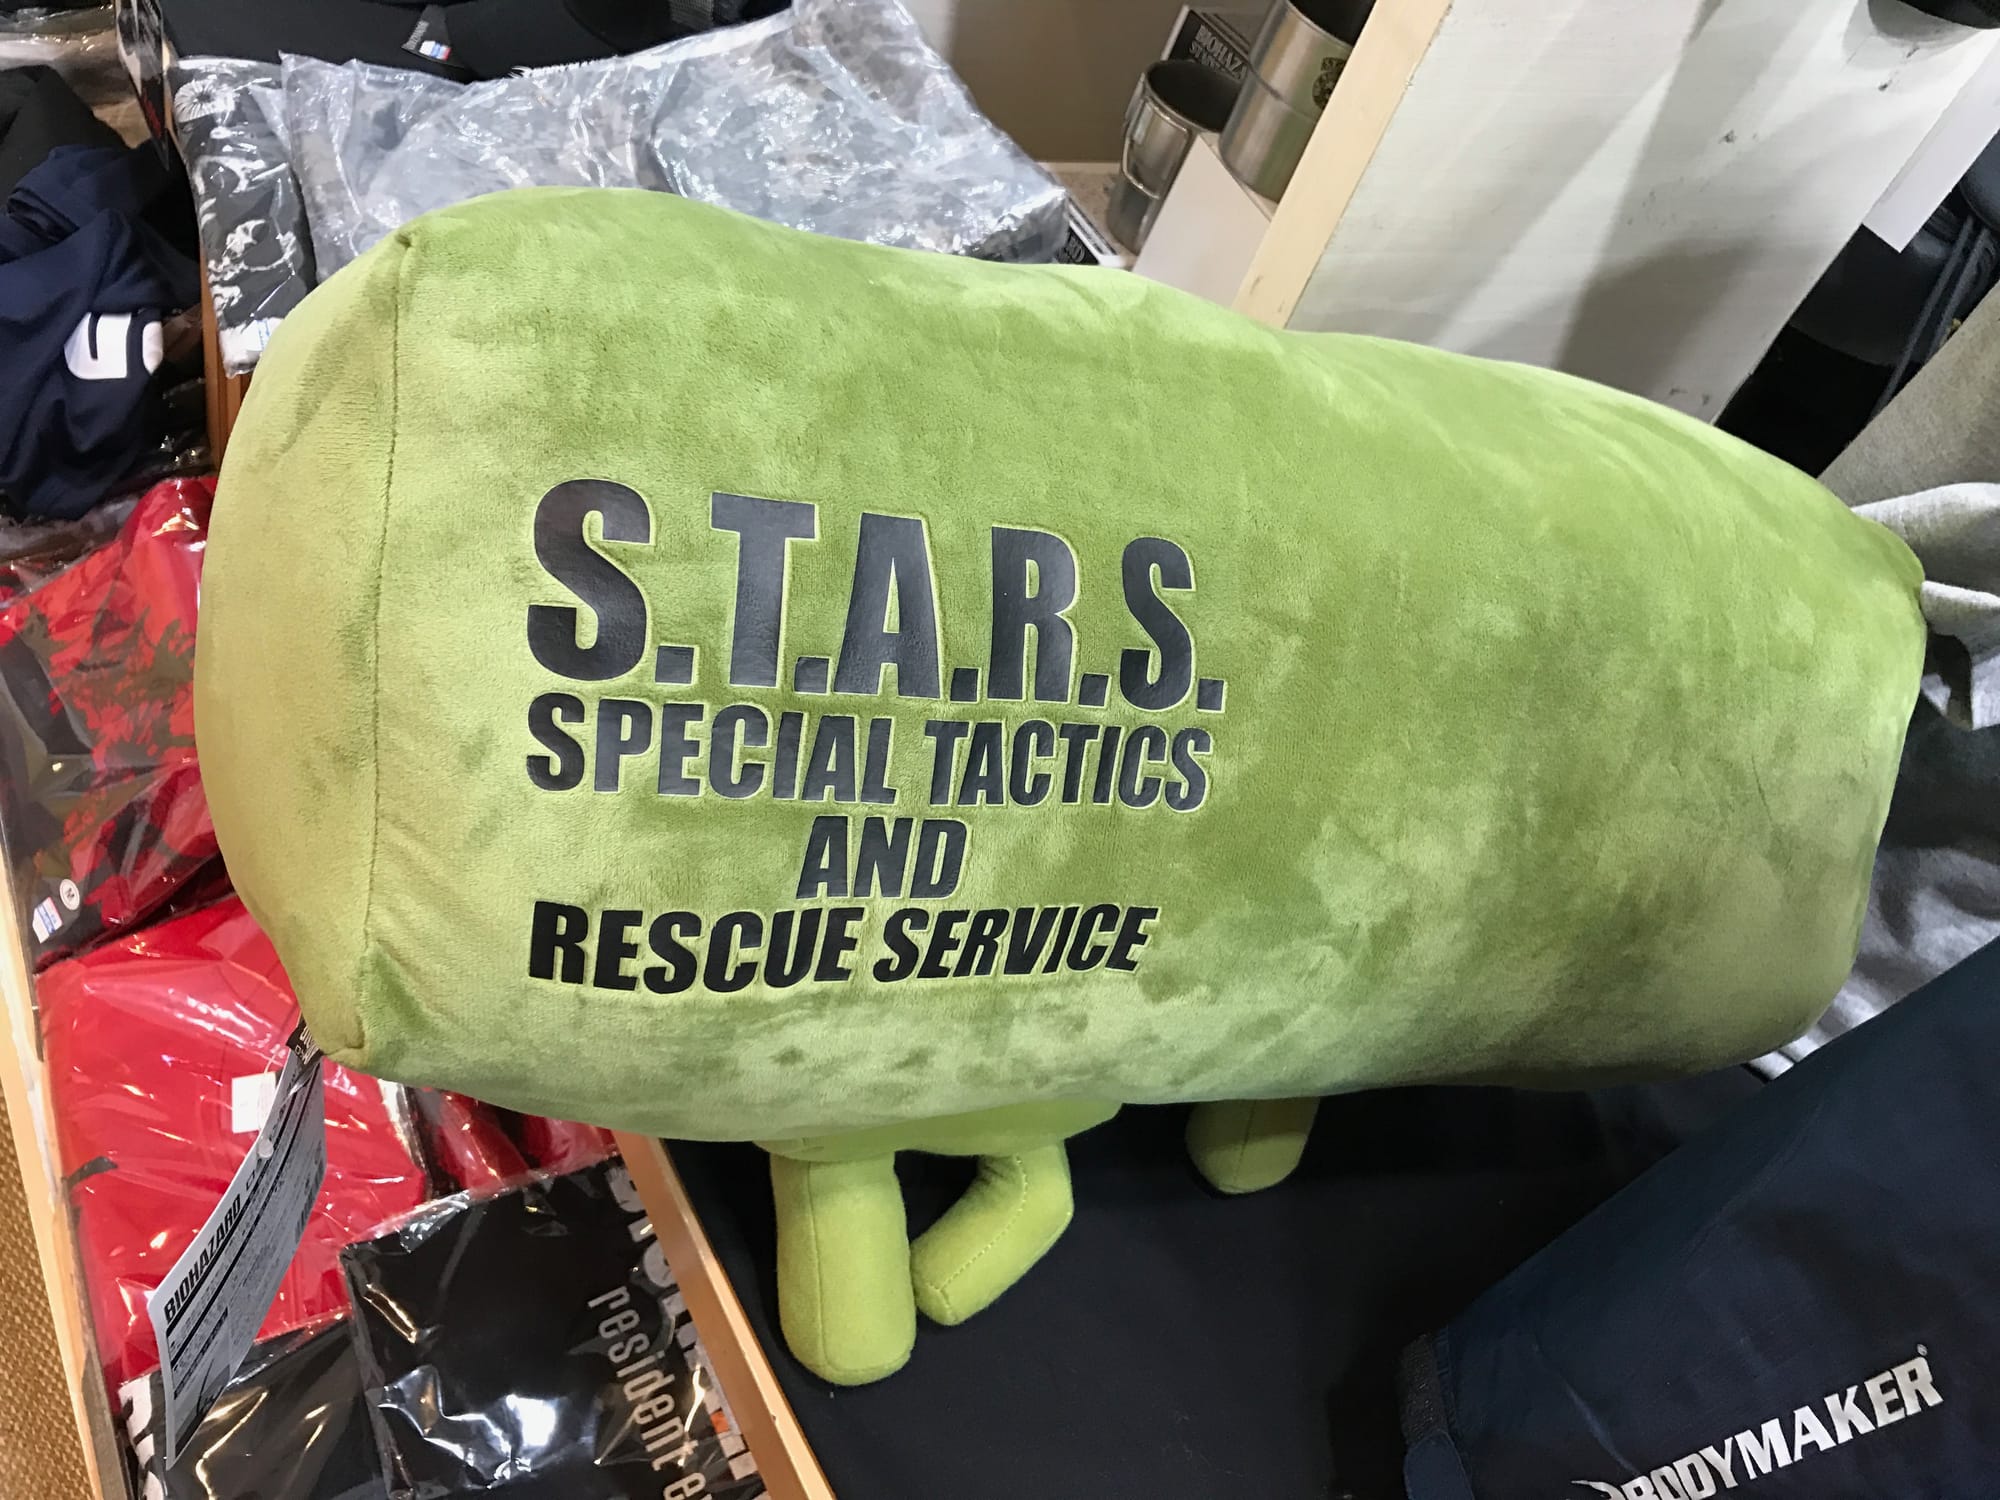 A plush toy rocket launcher from the game Resident Evil